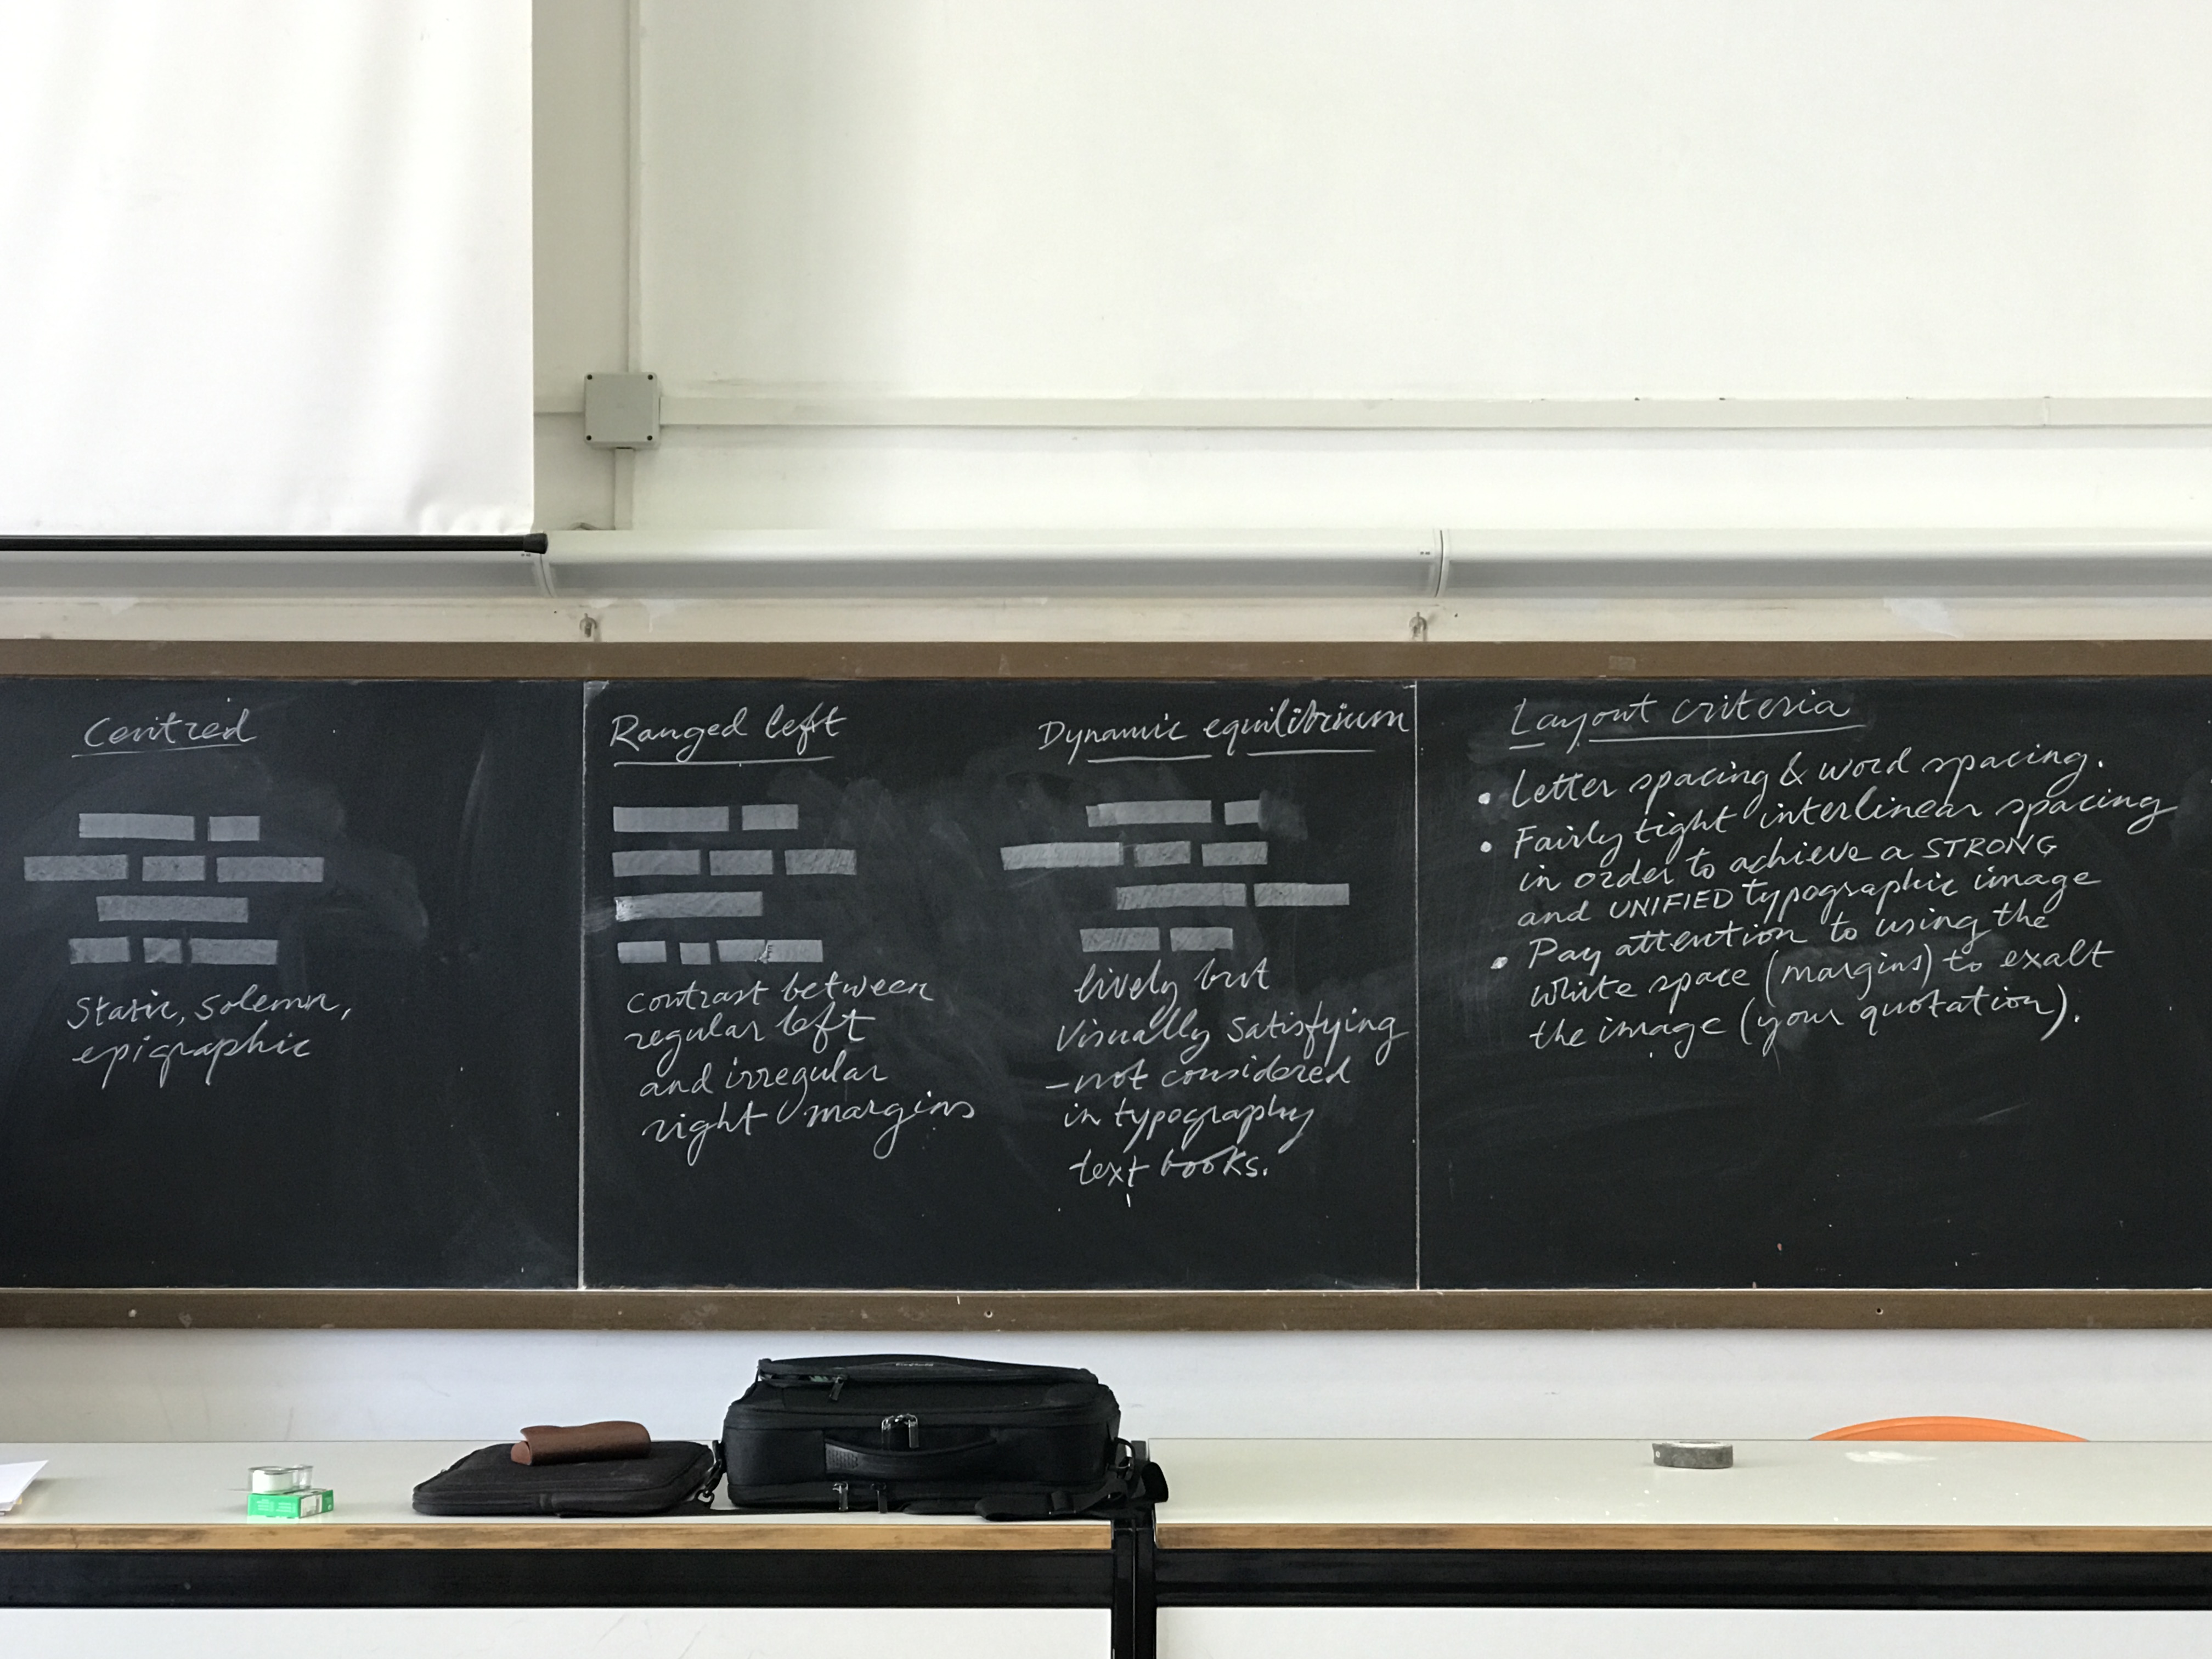 A class blackboard that has some writing on it and a bench with a backpack on it.